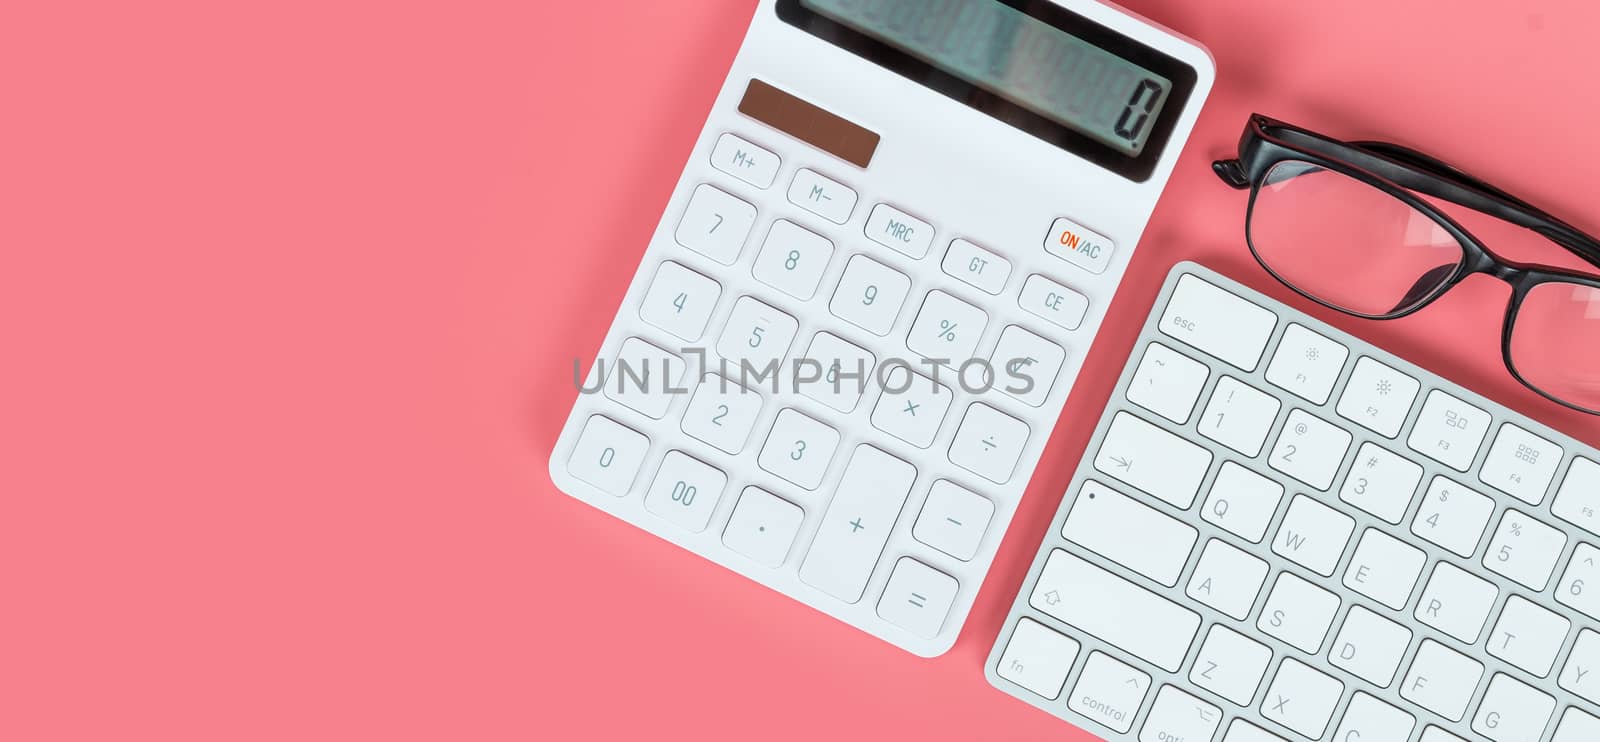 Top view female workplace, Computer keyboard, white calculator and glasses on a bright pink background.